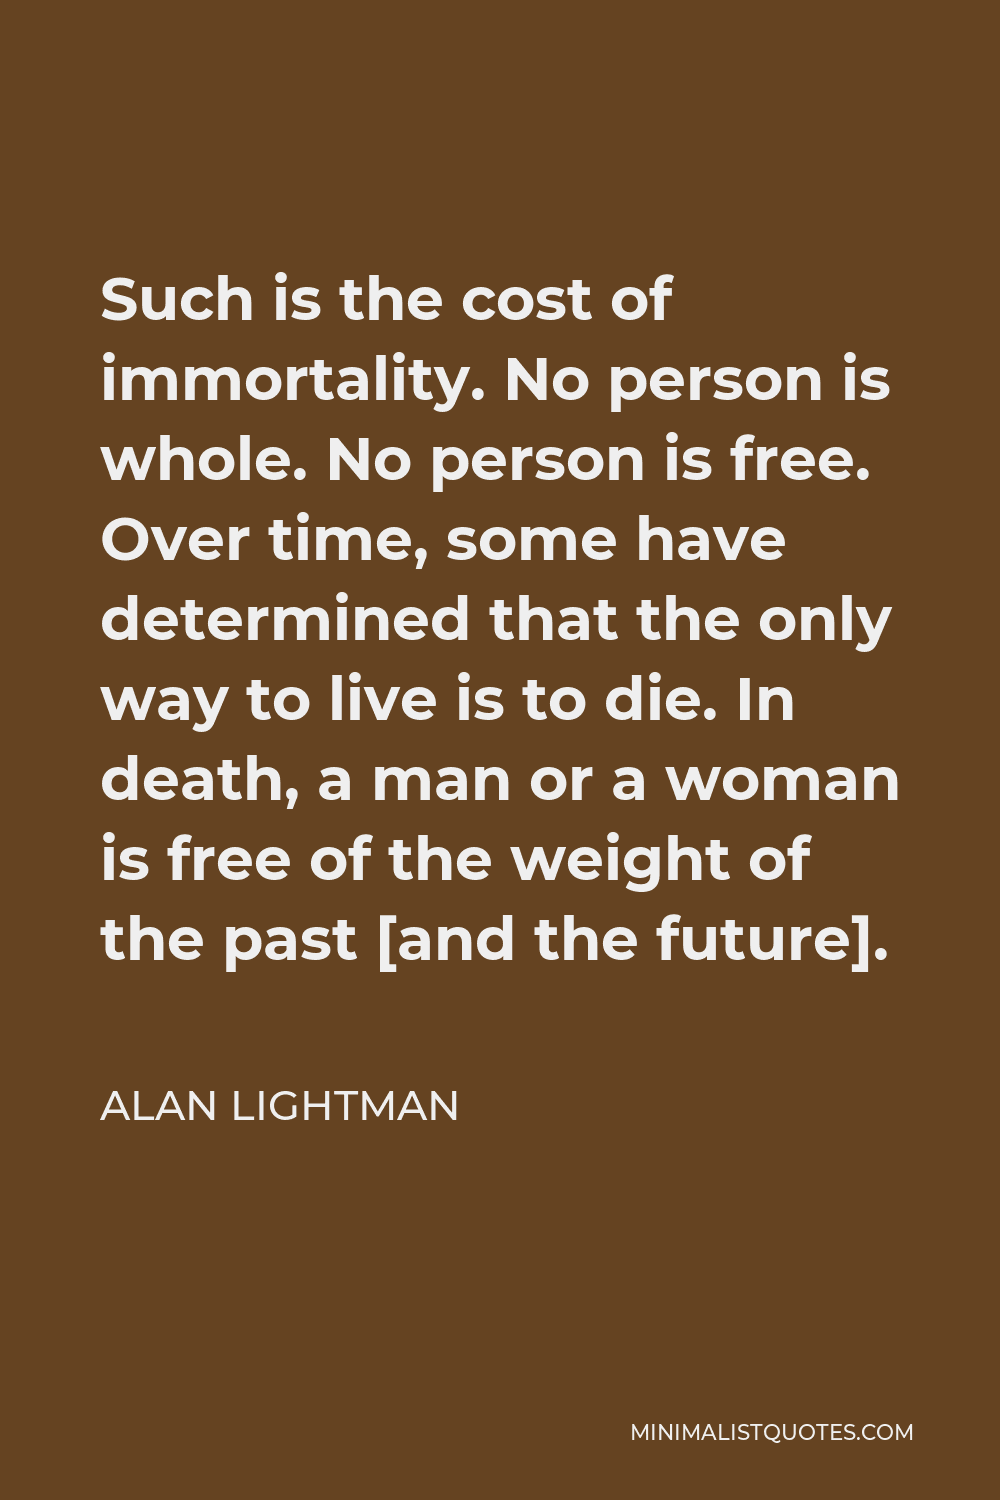 Alan Lightman Quote - Such is the cost of immortality. No person is whole. No person is free. Over time, some have determined that the only way to live is to die. In death, a man or a woman is free of the weight of the past [and the future].